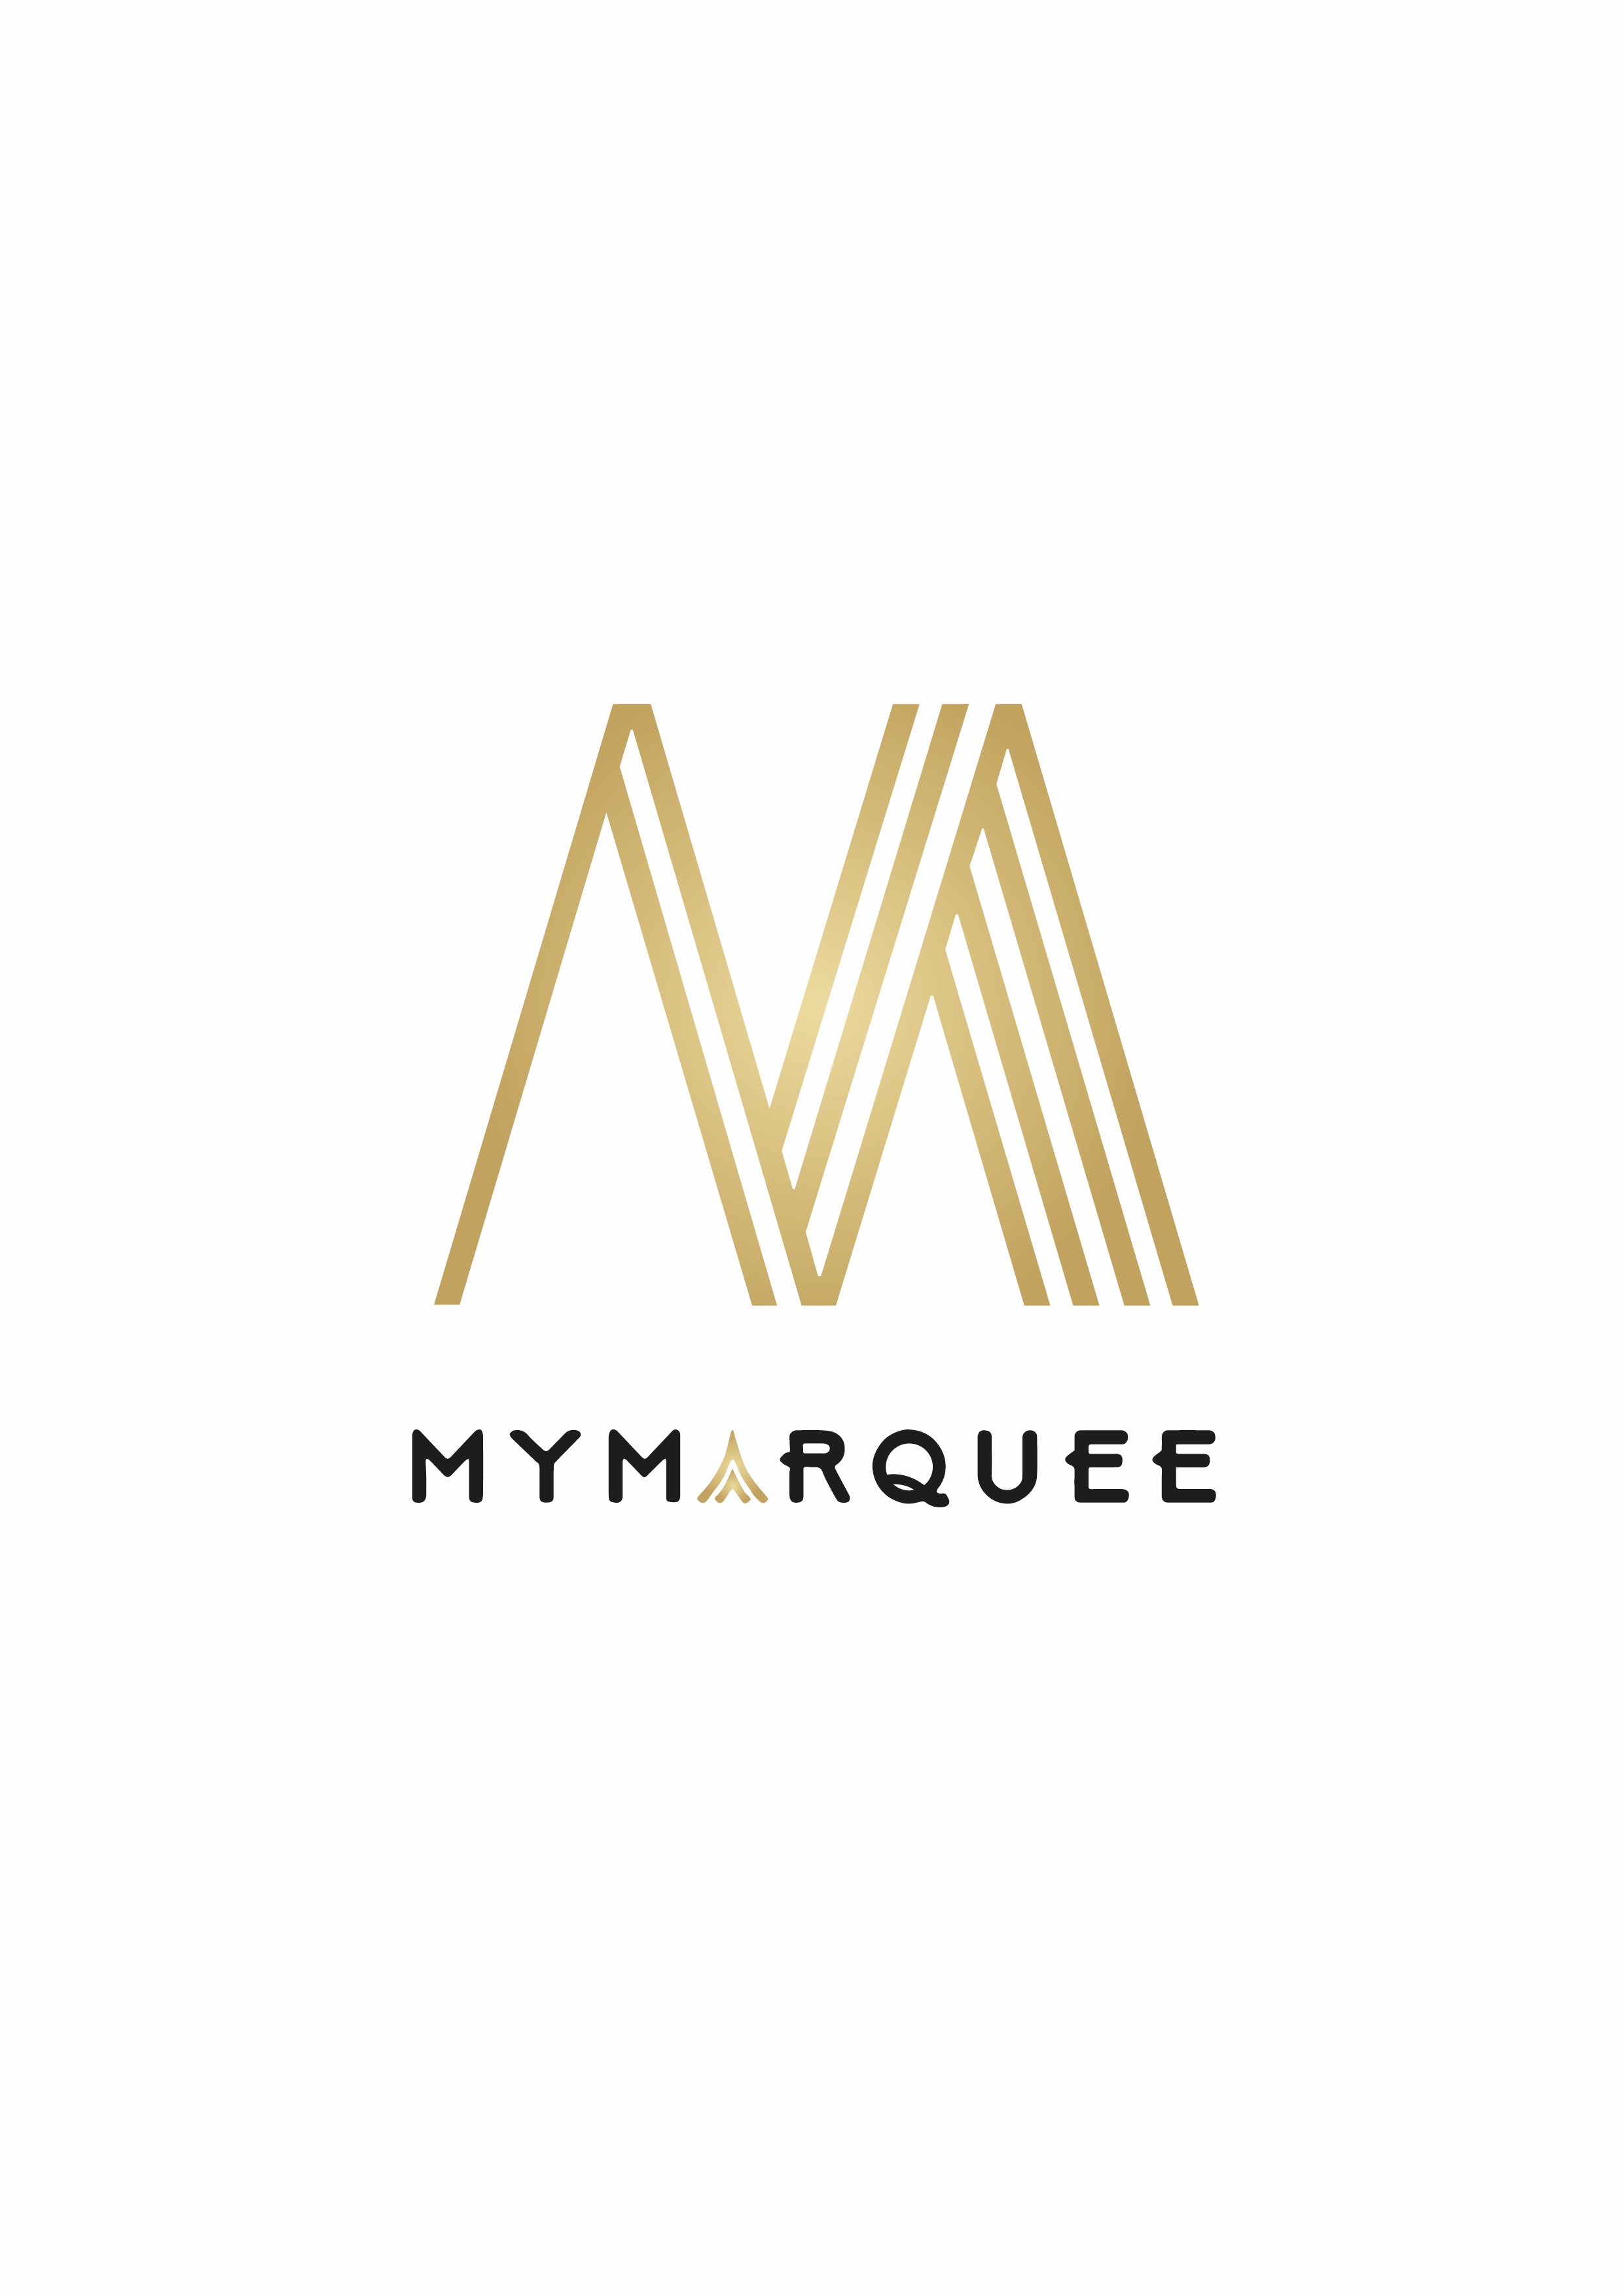 Logo of MY MARQUEE Marquee Hire Service In Birmingham, West Midlands